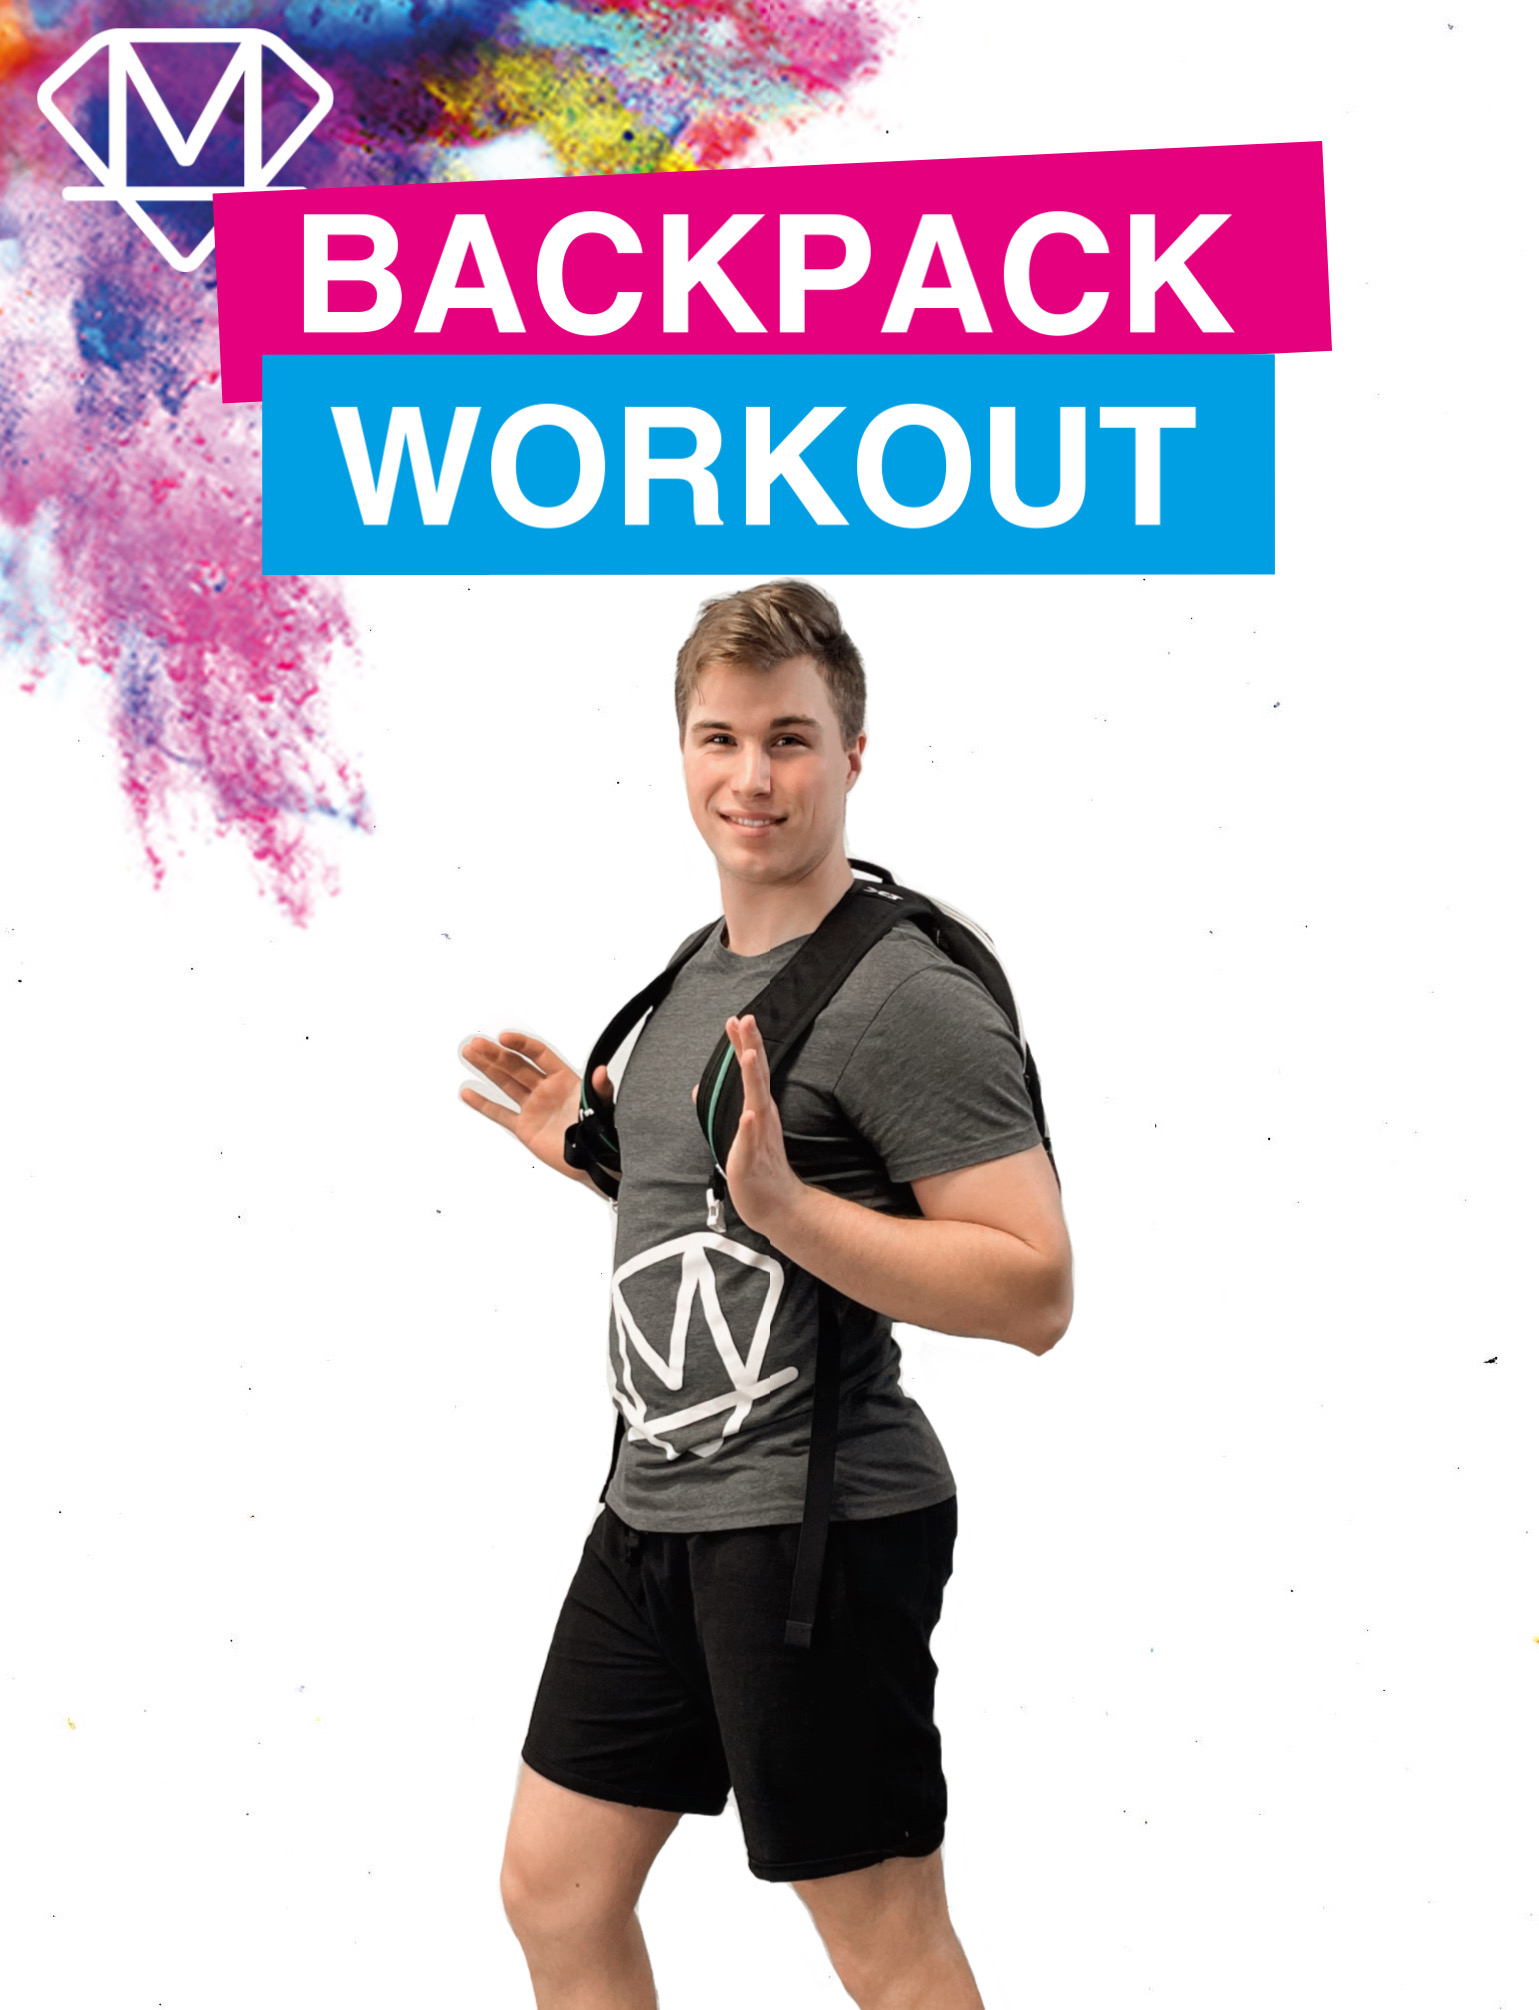 Backpack Workout